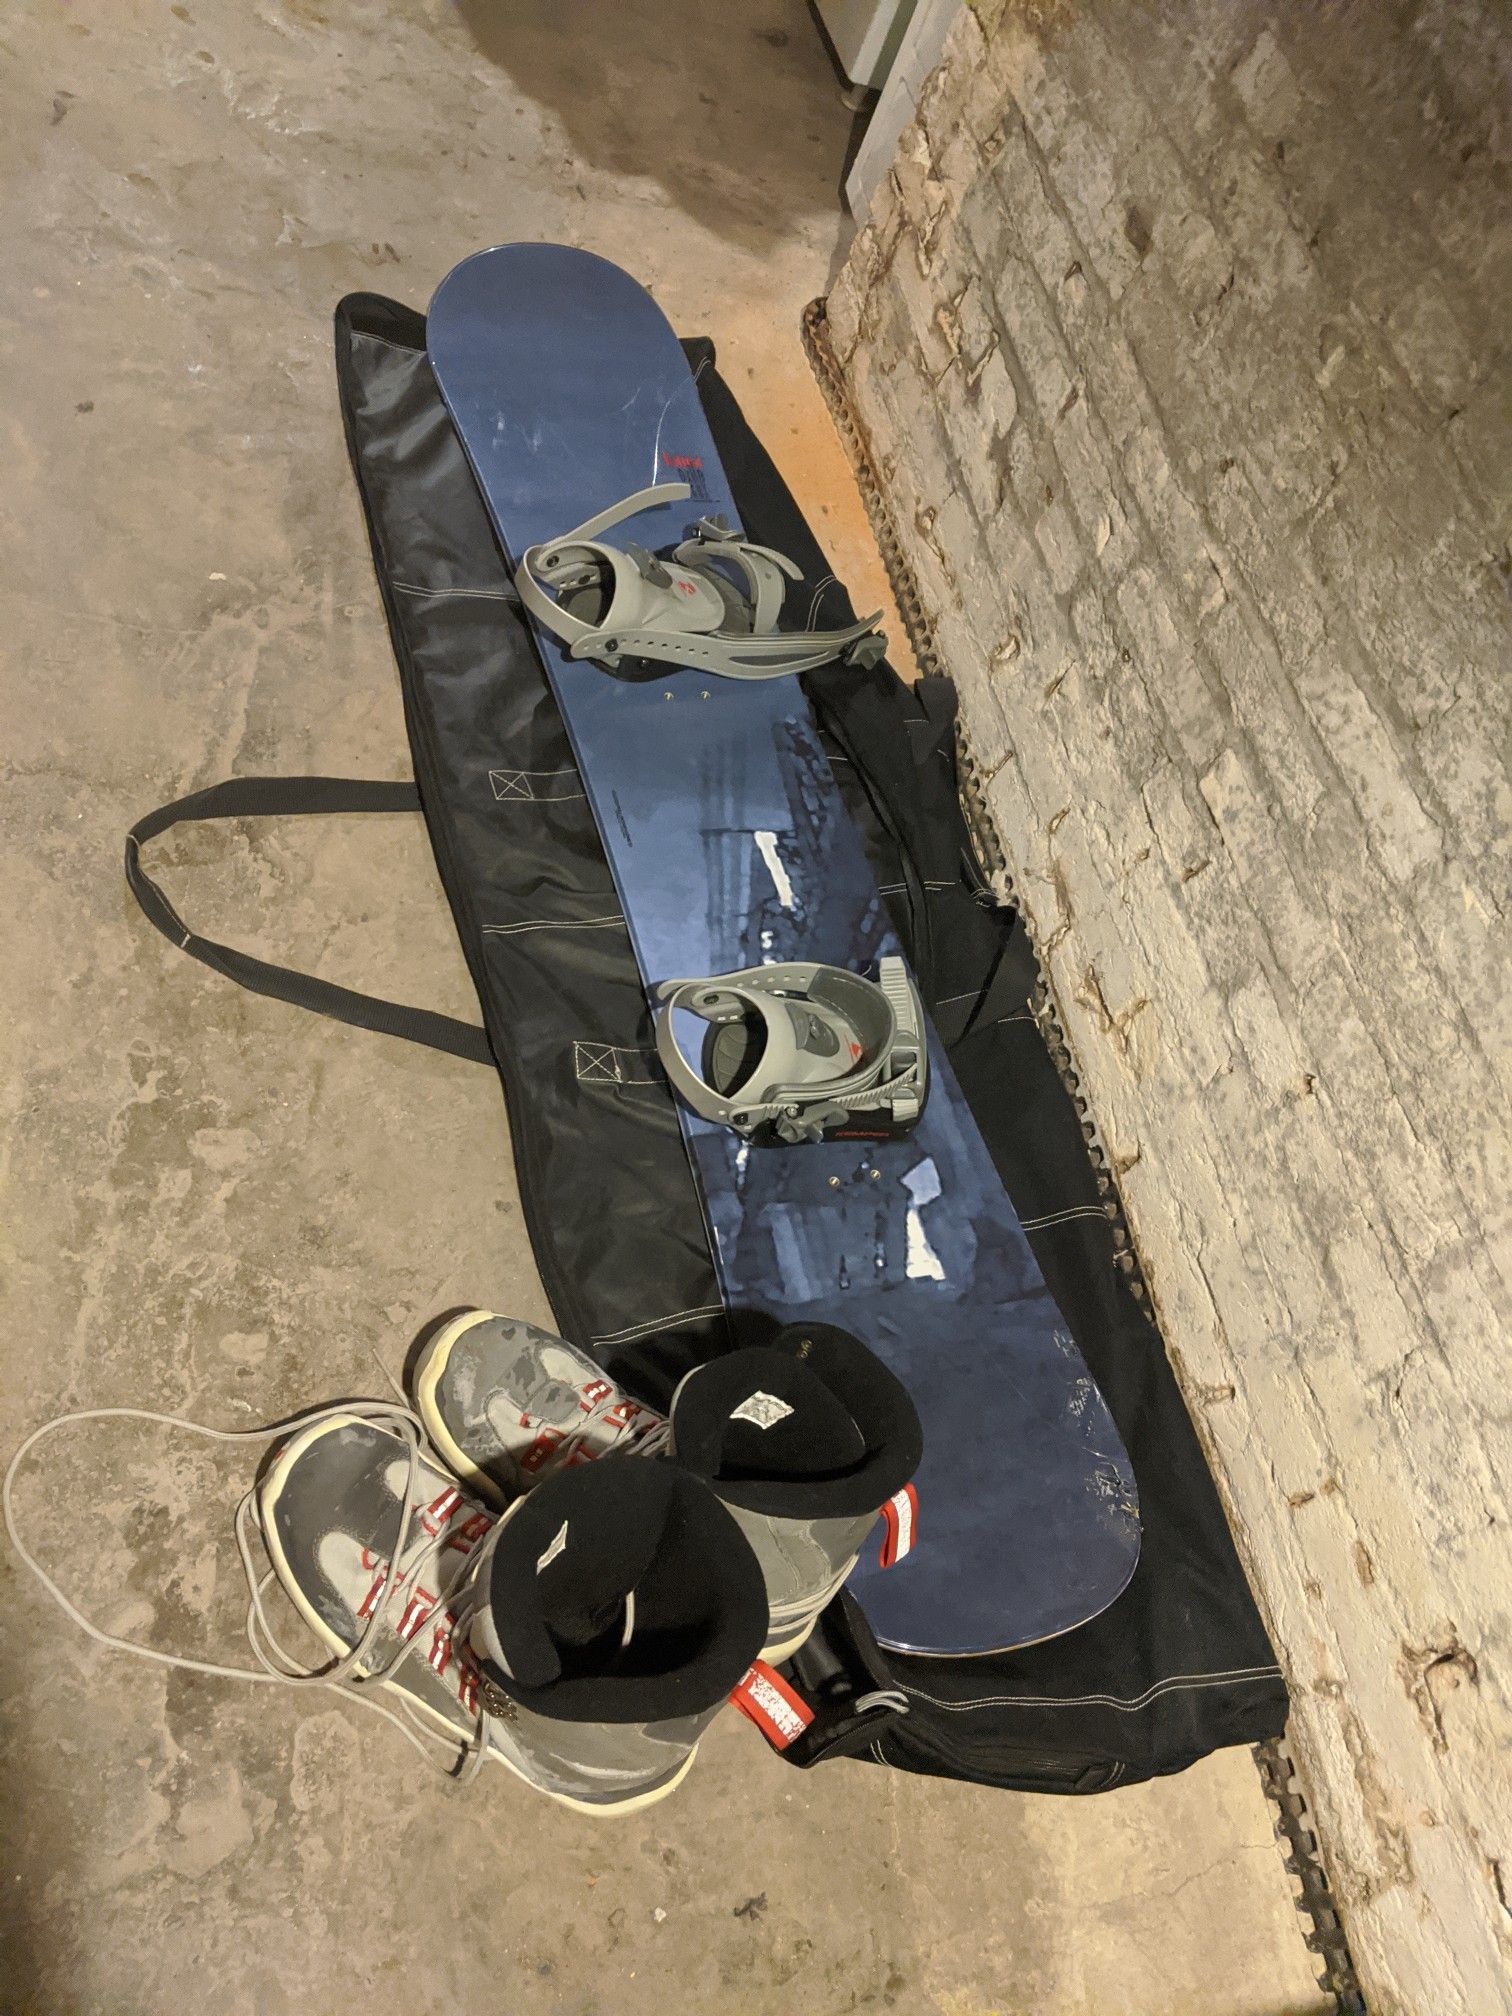 Lamar exile 159x wide board, Kemper bindings and boots